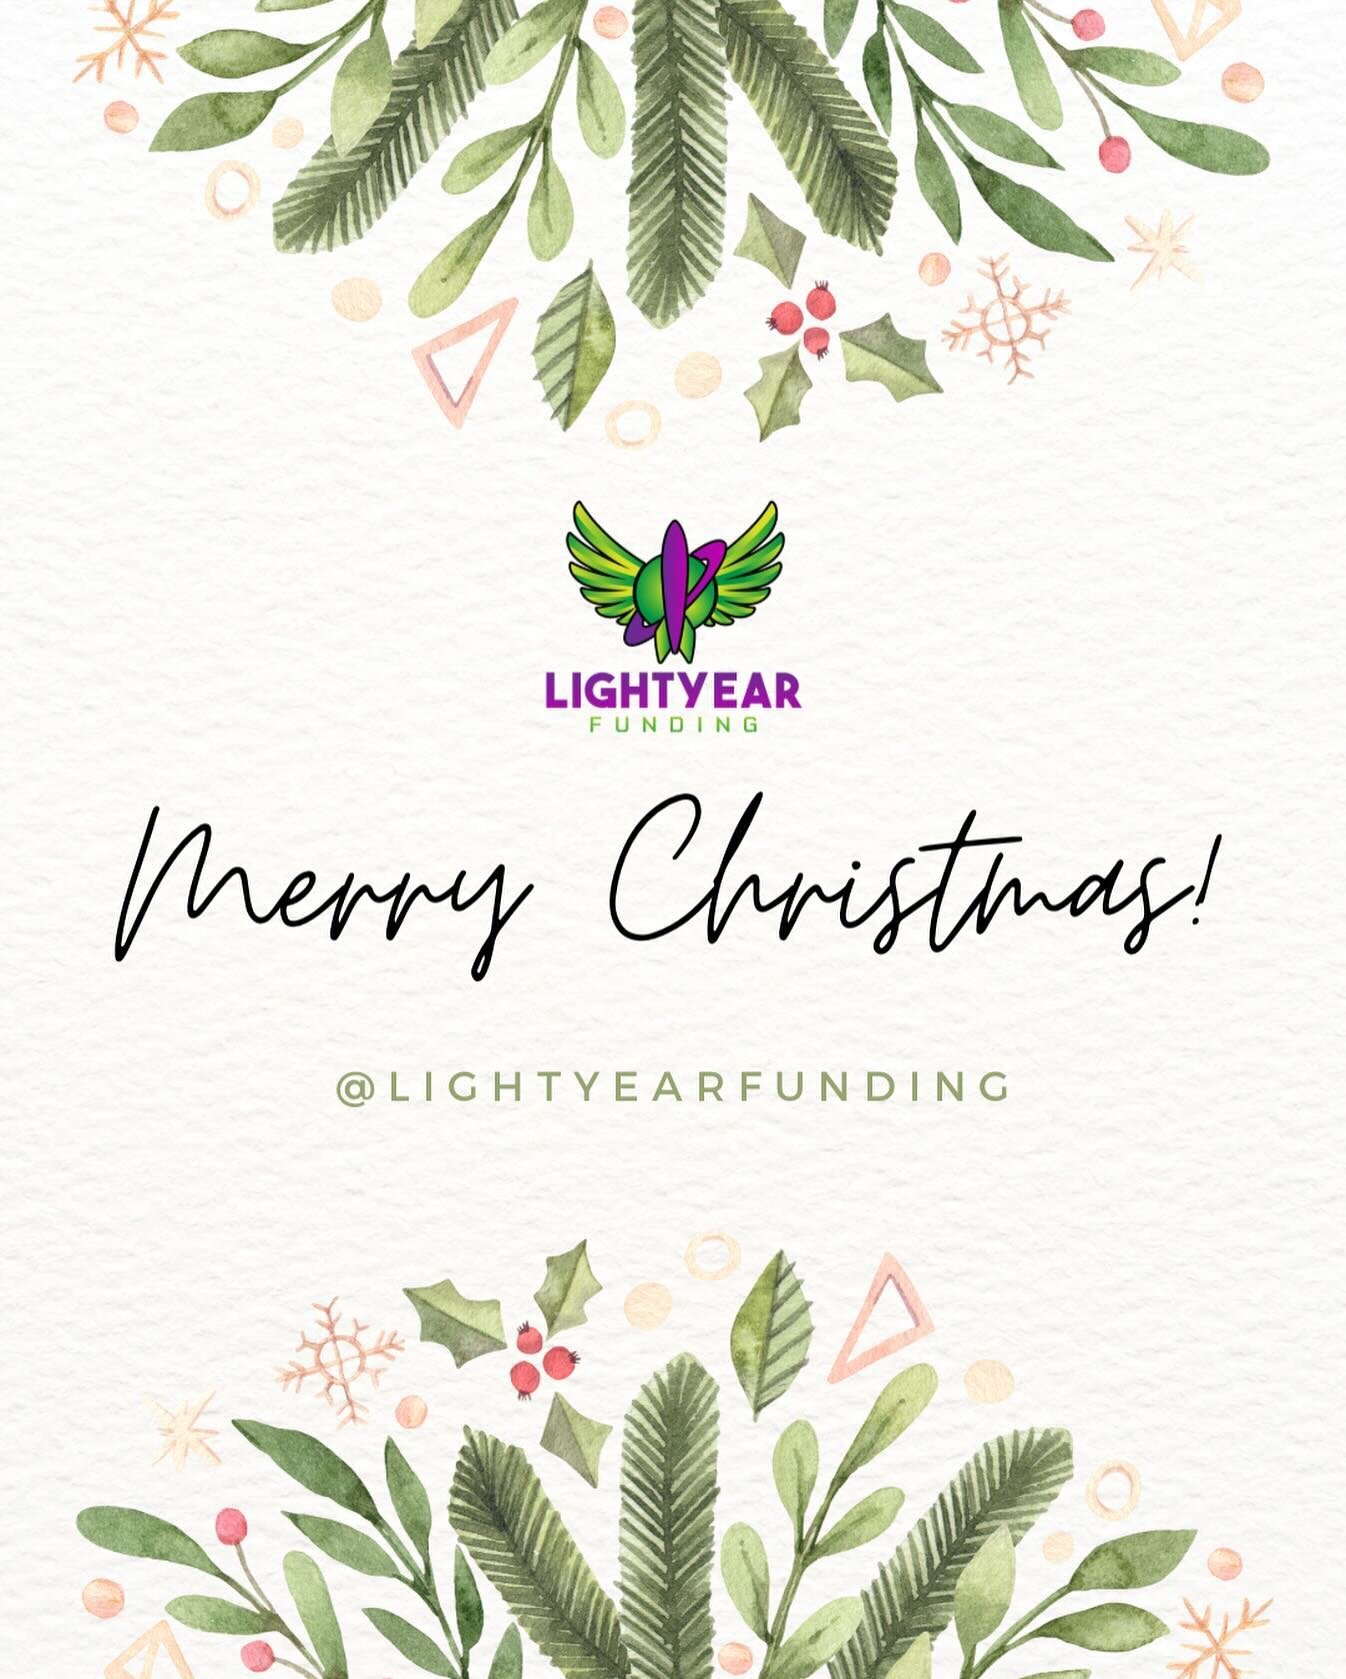 Love and light to all! We appreciate each and every one of you and wish you the best holiday ever. Enjoy this year that is wrapping up and set new intentions for a wonderful new year. Merry Christmas. 

#lightyearfunding #medicalfunding #mri #persona